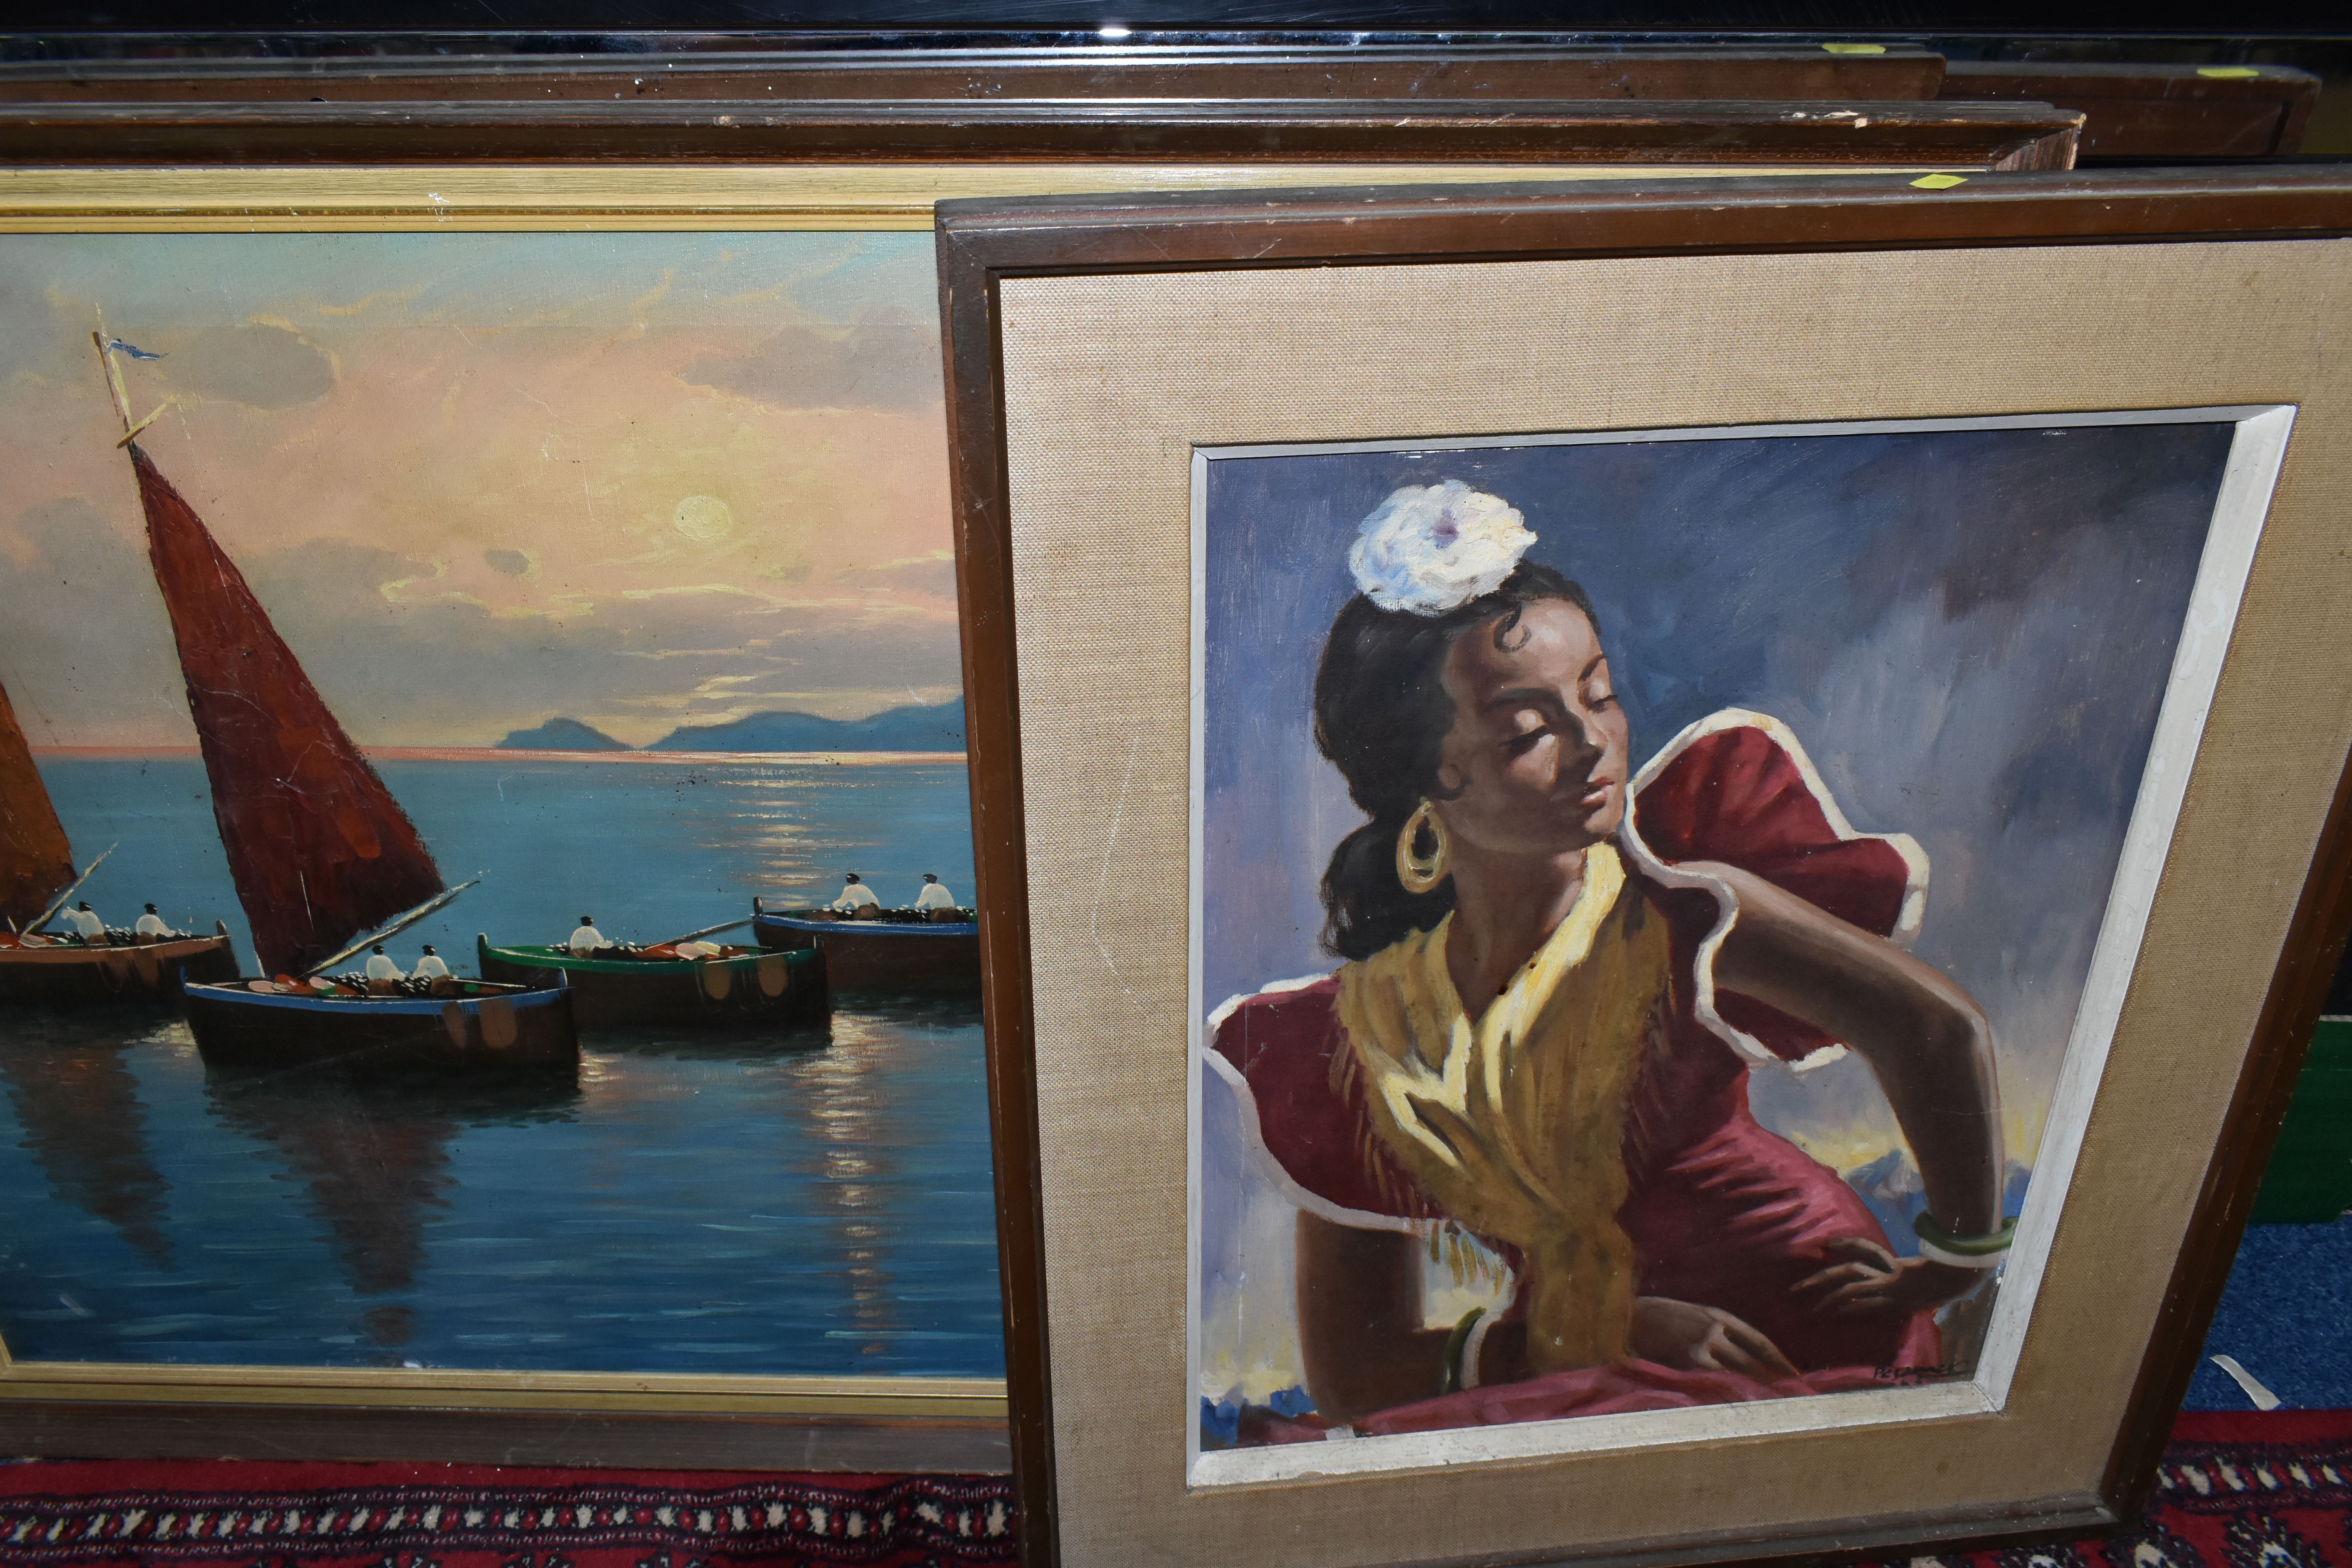 THREE BOXES OF BOOKS AND SUNDRIES, to include two framed oils on canvas, two large carved wooden - Image 8 of 11